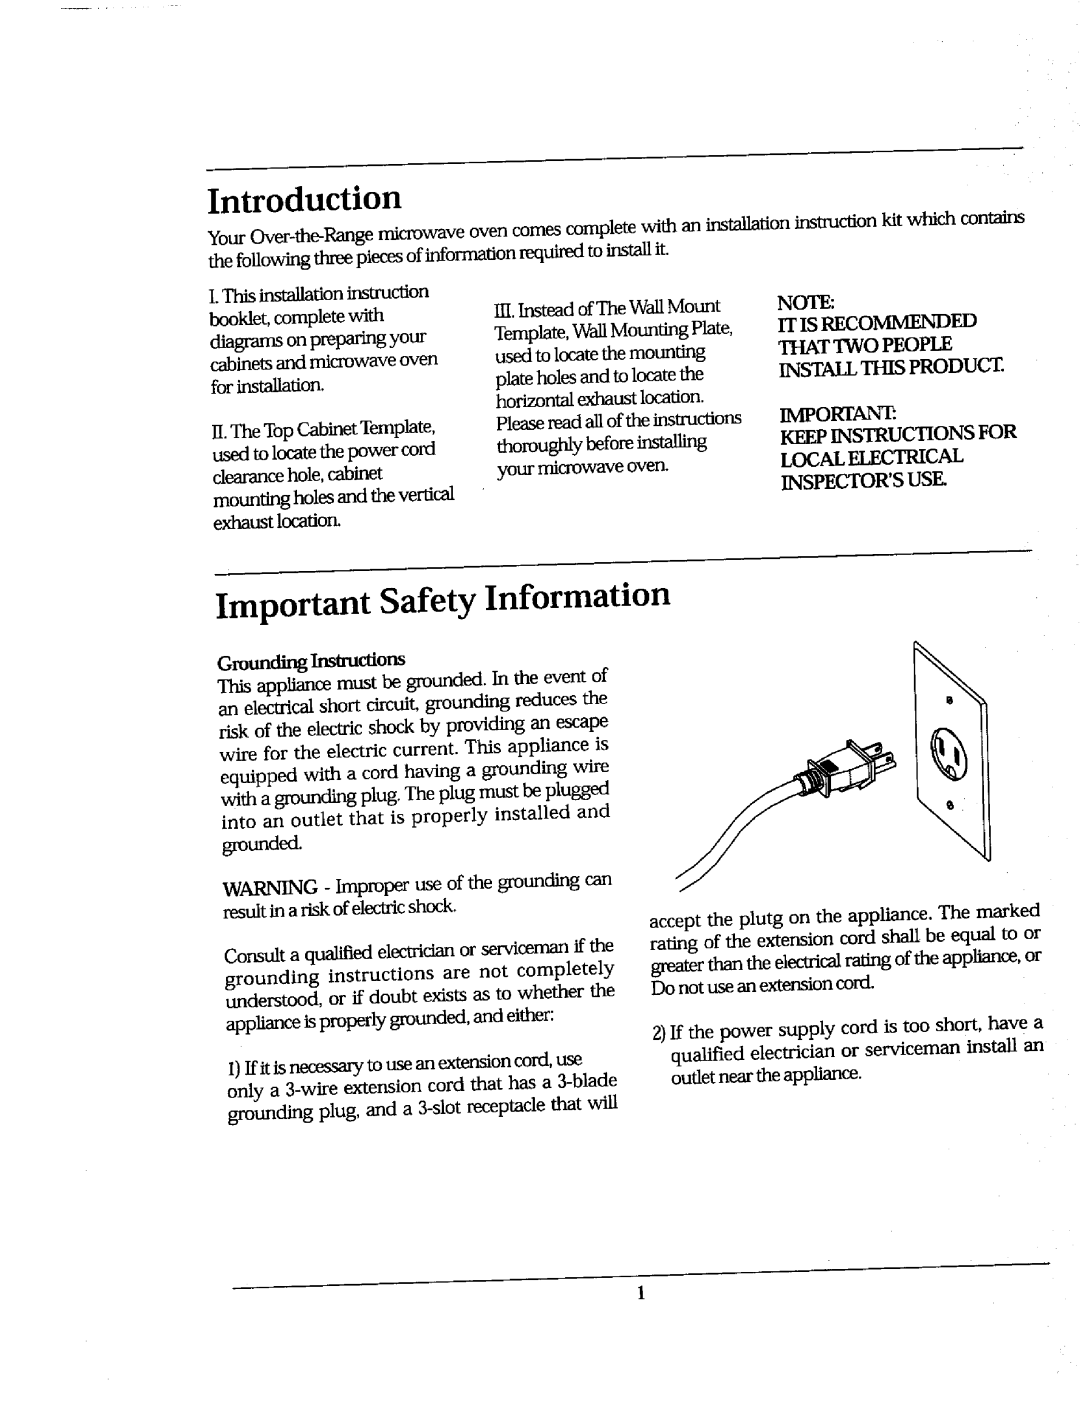 Whirlpool Ni-l30 manual Important Safety Information, Introduction, Grounding Instructions 